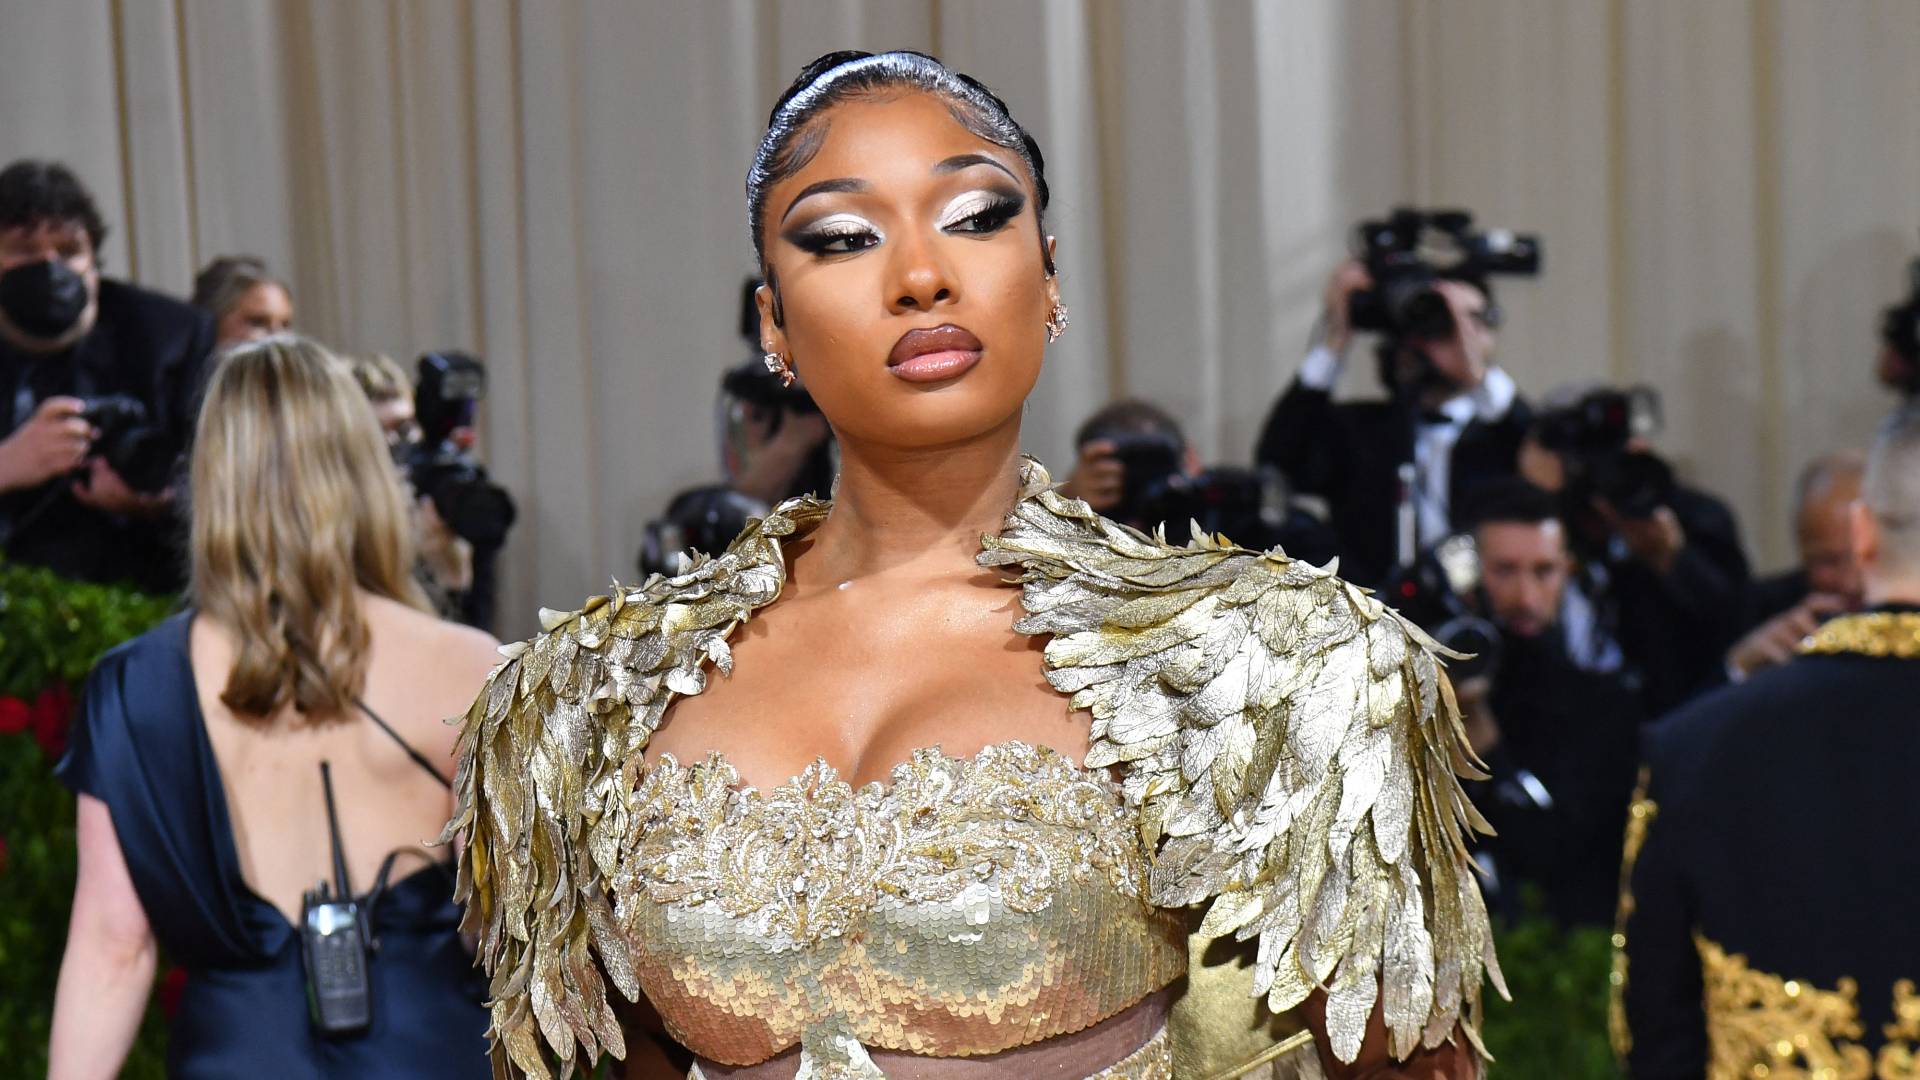 Megan Thee Stallion arrives for the 2022 Met Gala at the Metropolitan Museum of Art on May 2, 2022, in New York. - The Gala raises money for the Metropolitan Museum of Art's Costume Institute. The Gala's 2022 theme is "In America: An Anthology of Fashion". 